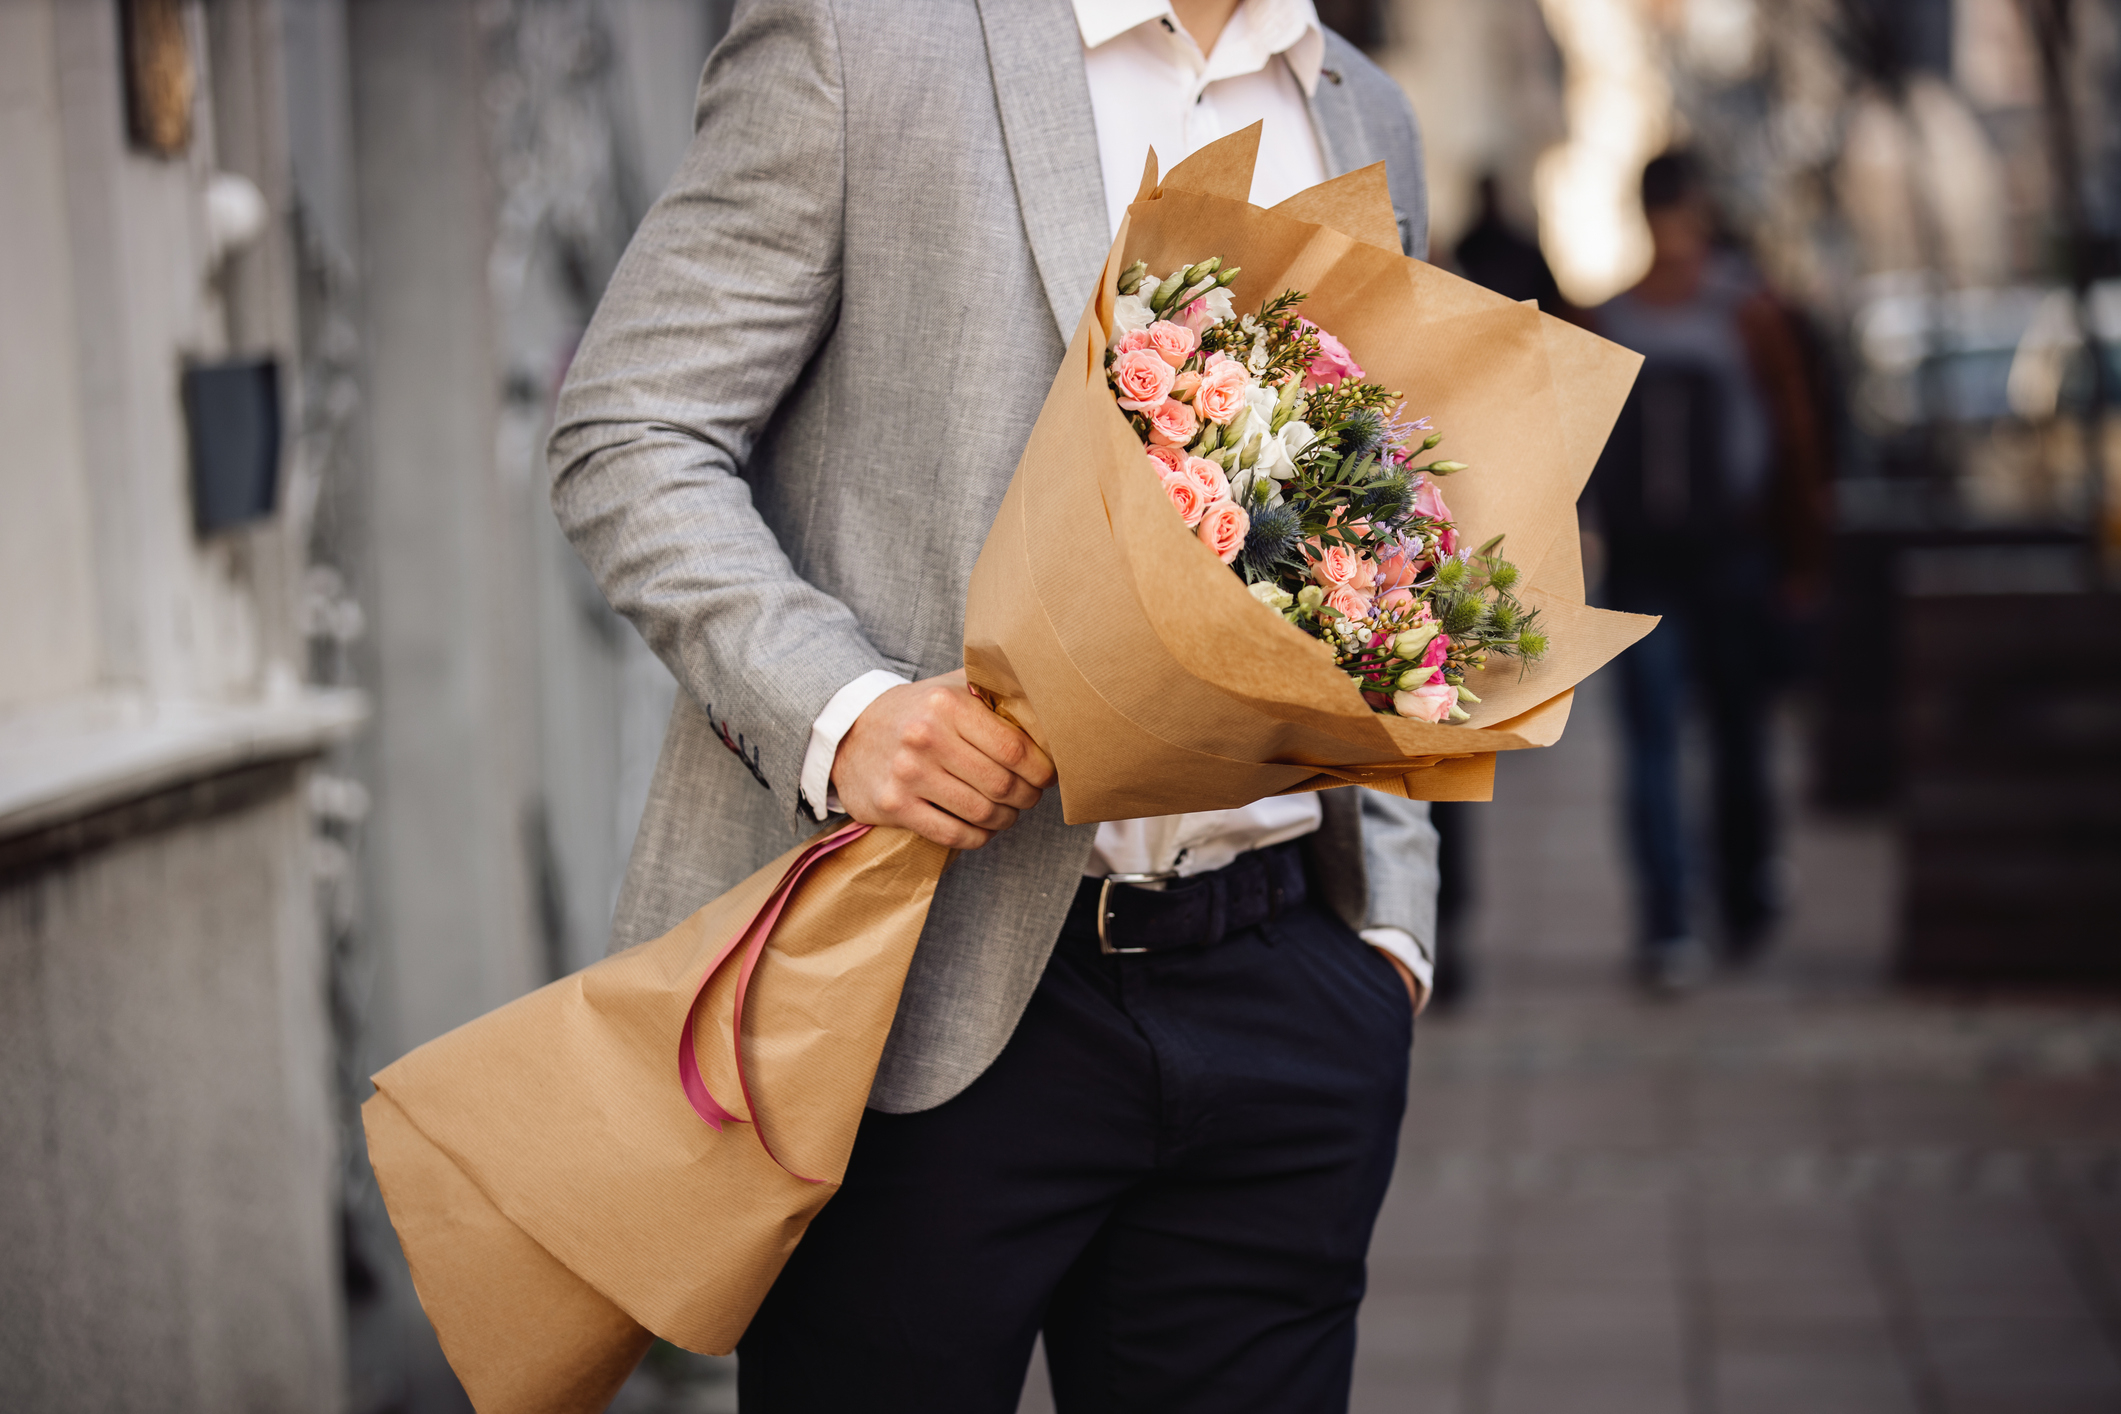 A man holding a bouquet of flowers